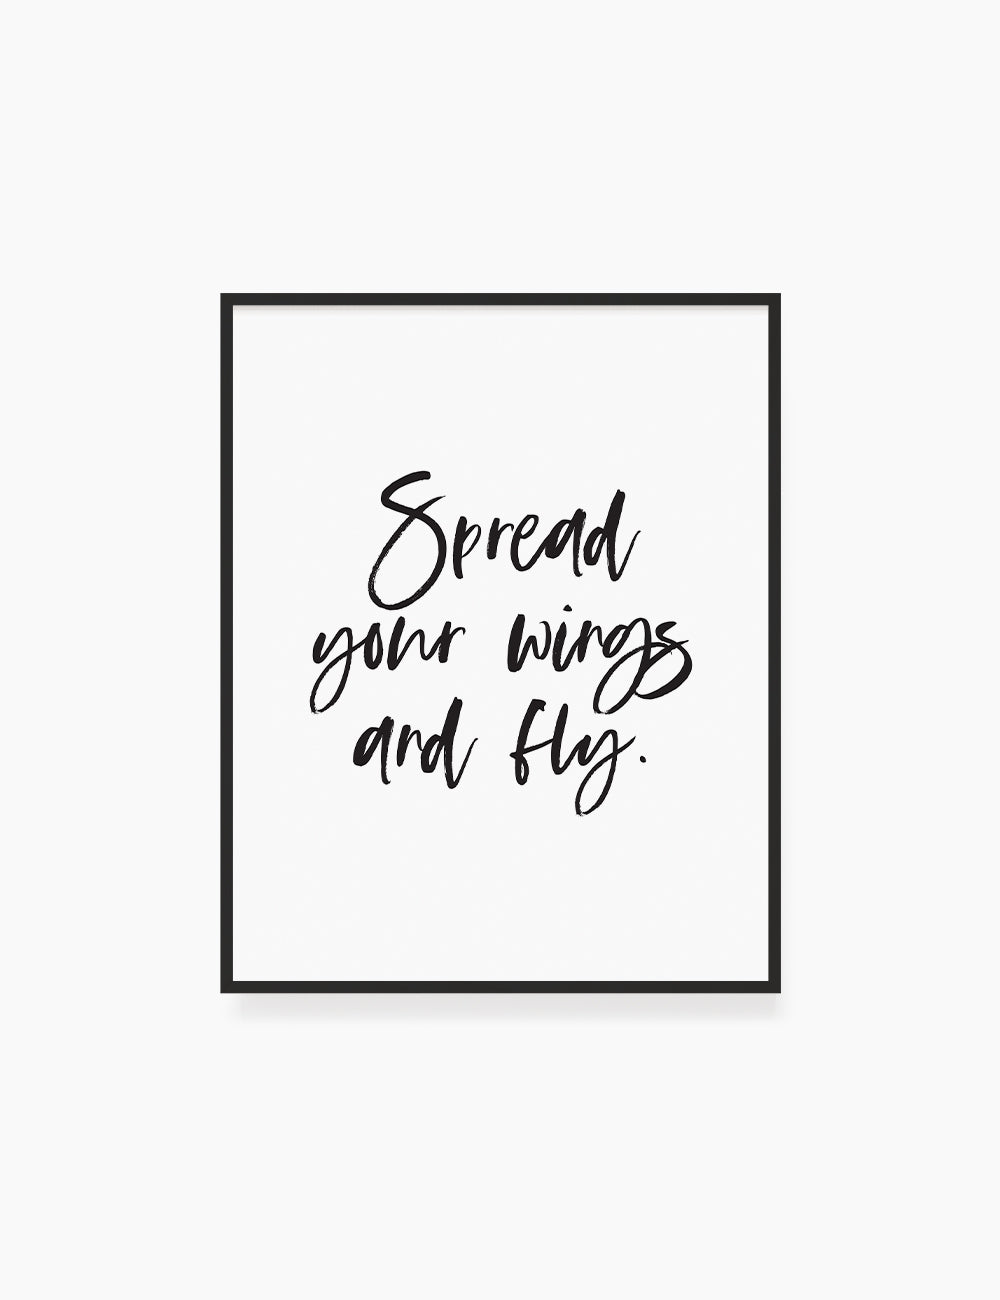 Printable Wall Art Quote: SPREAD YOUR WINGS AND FLY. Printable Poster. Inspirational Quote. Motivational Quote. WA008 - Paper Moon Art & Design